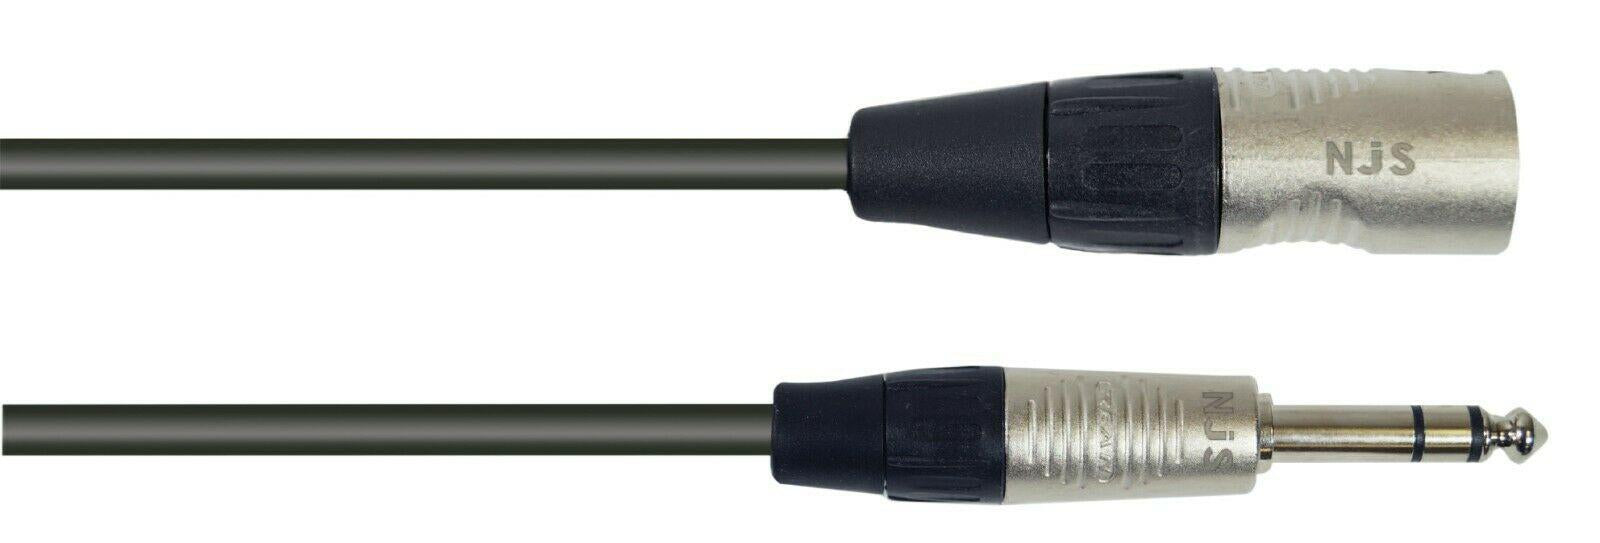 Hi Quality Male XLR Male to 6.35mm Mono Jack Microphone Cable